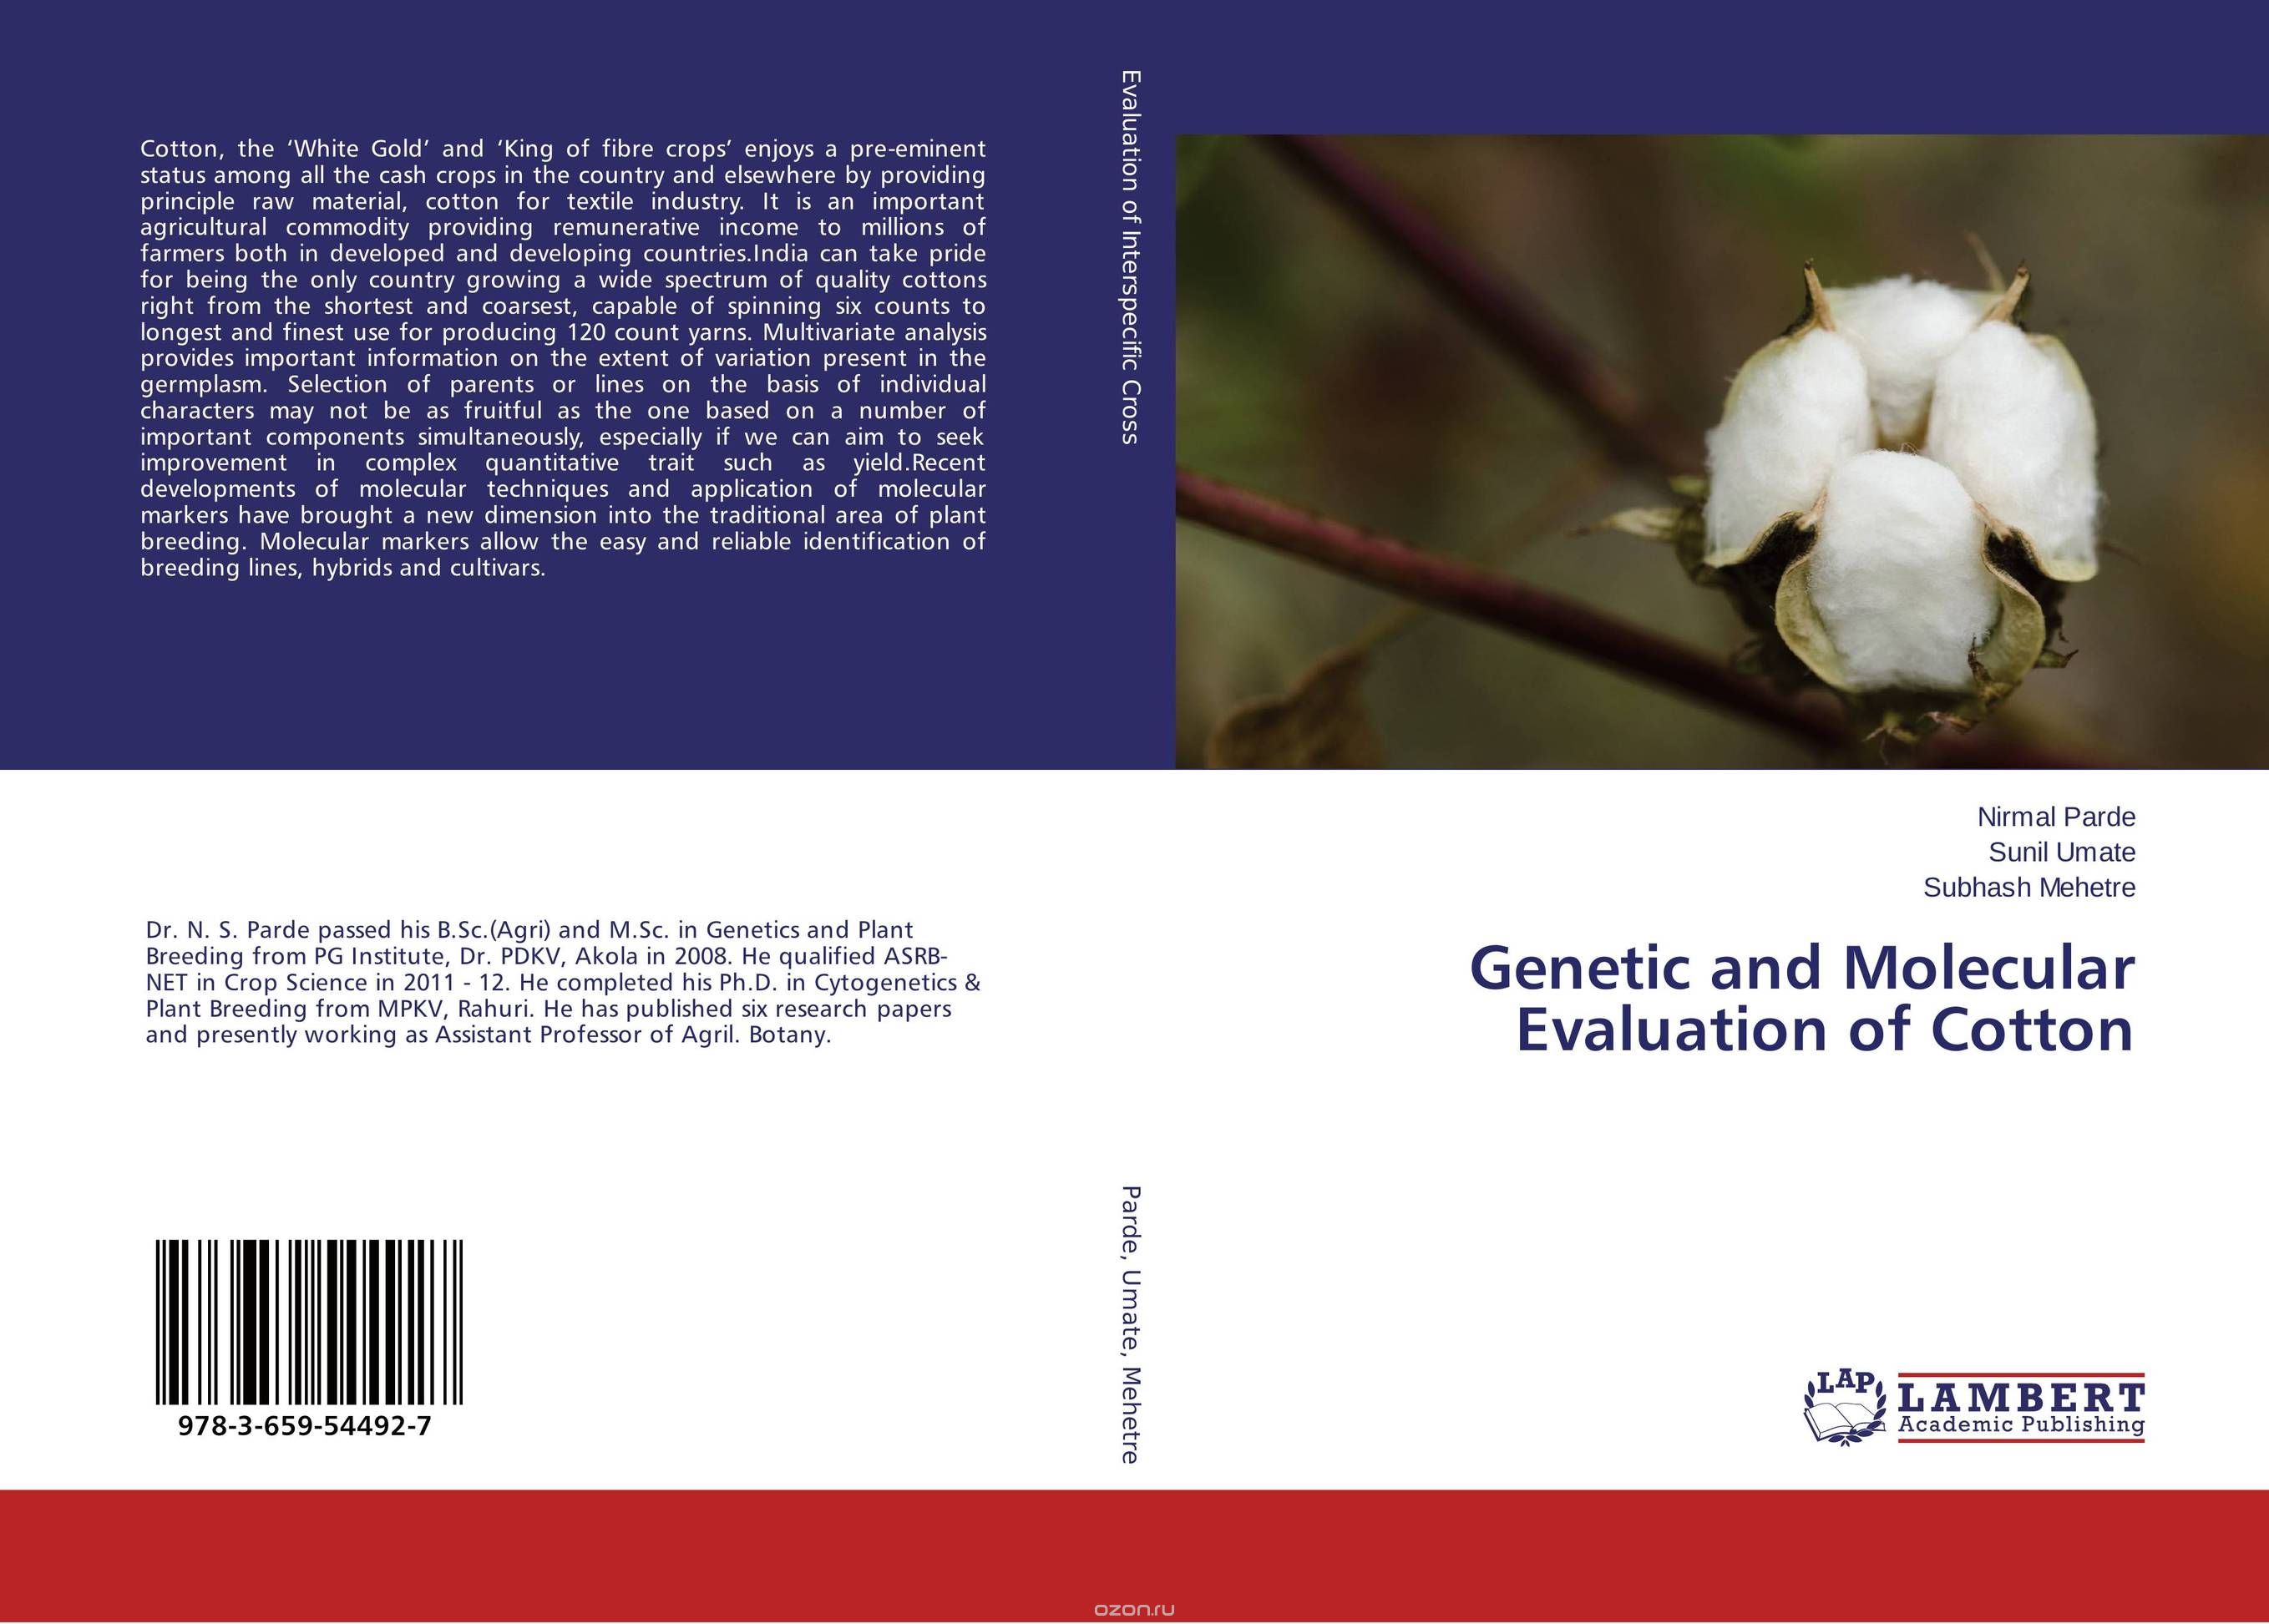 Genetic and Molecular Evaluation of Cotton